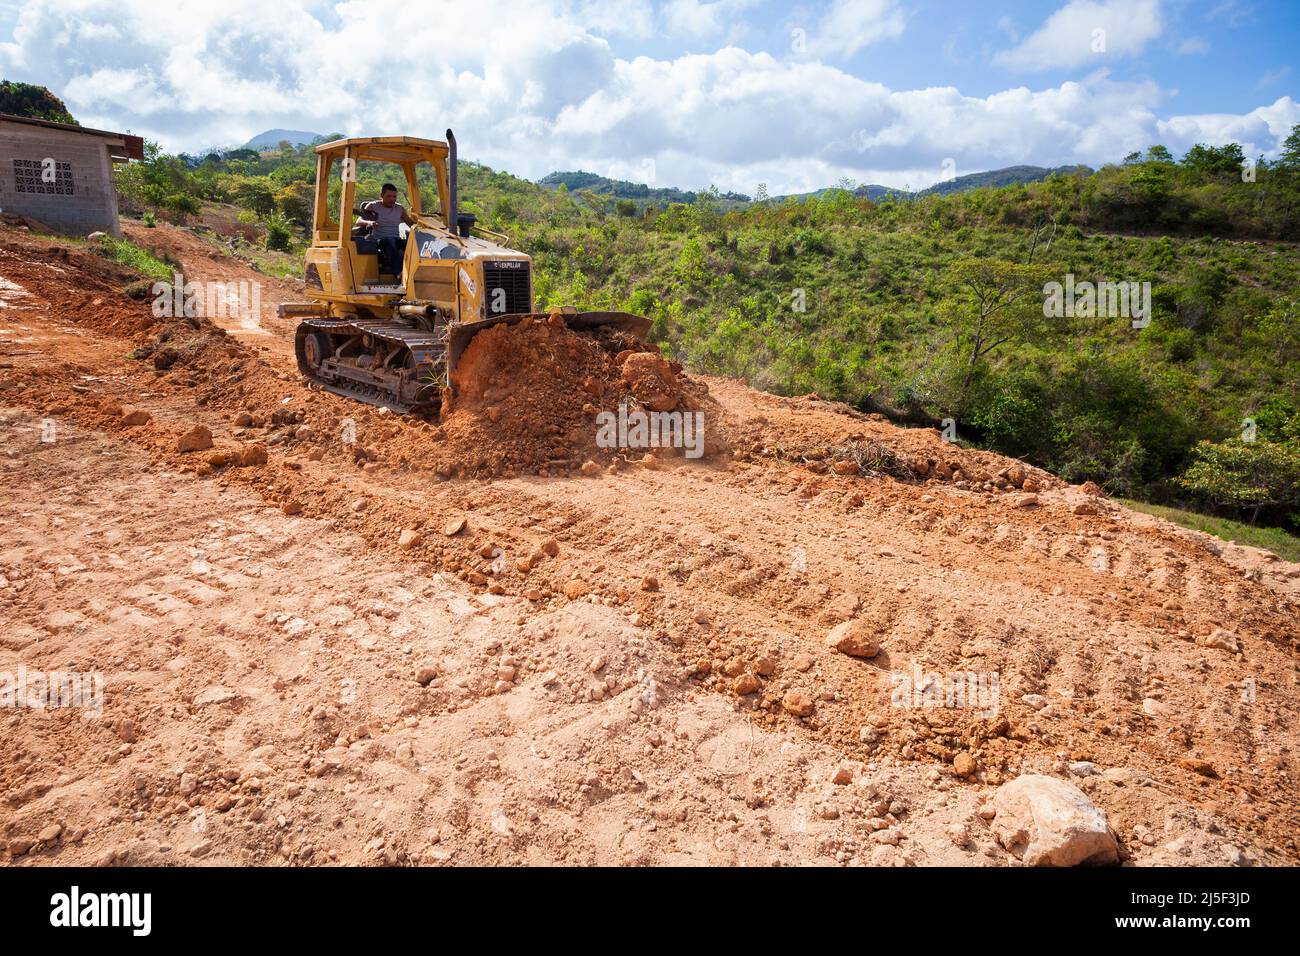 A bulldozer at work on a construction site at Las Minas, Cocle province, Republic of Panama, Central America. Stock Photo